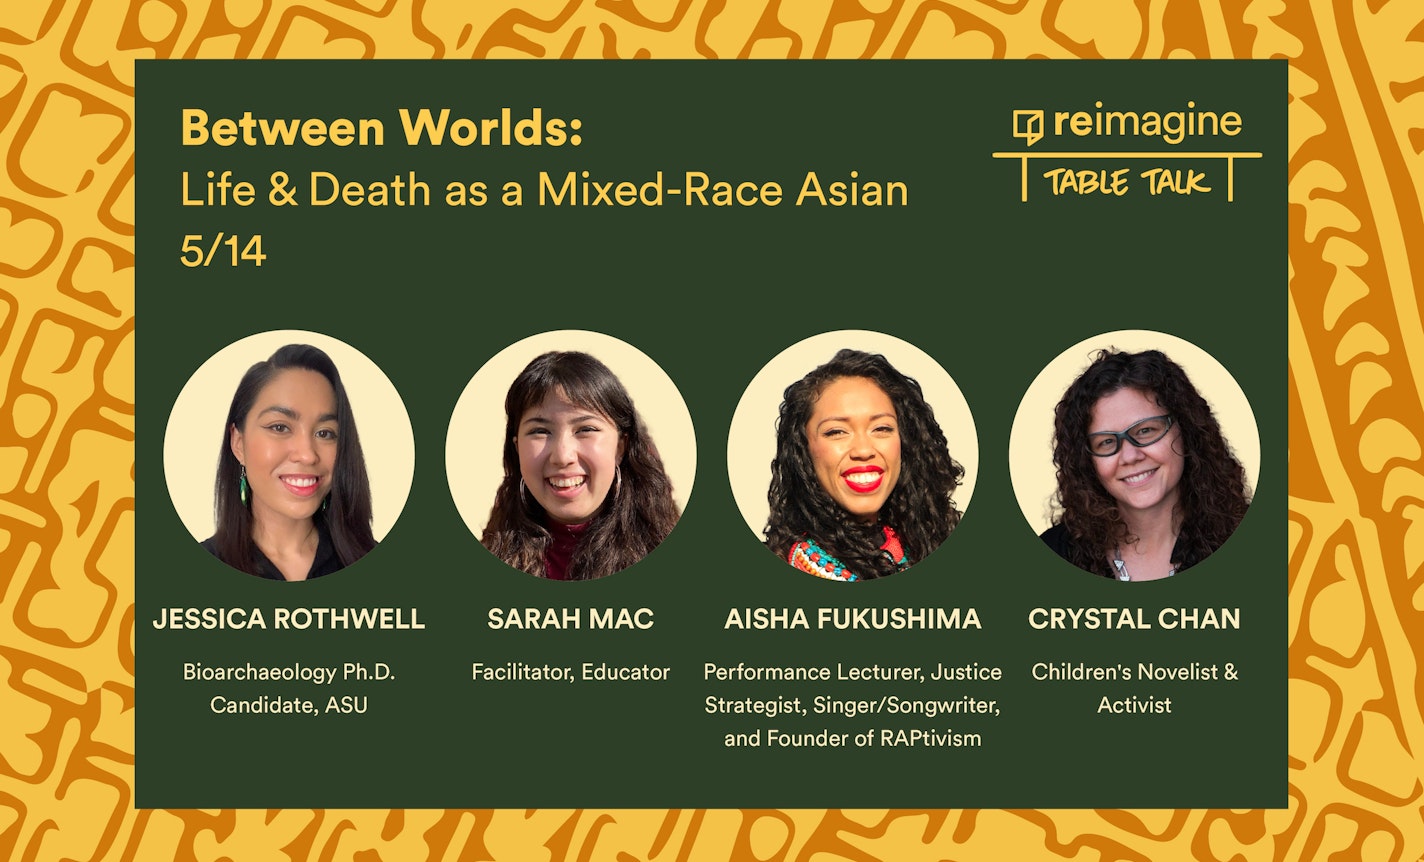 Table Talk | Between Worlds: Life & Death a Mixed-Race Asian